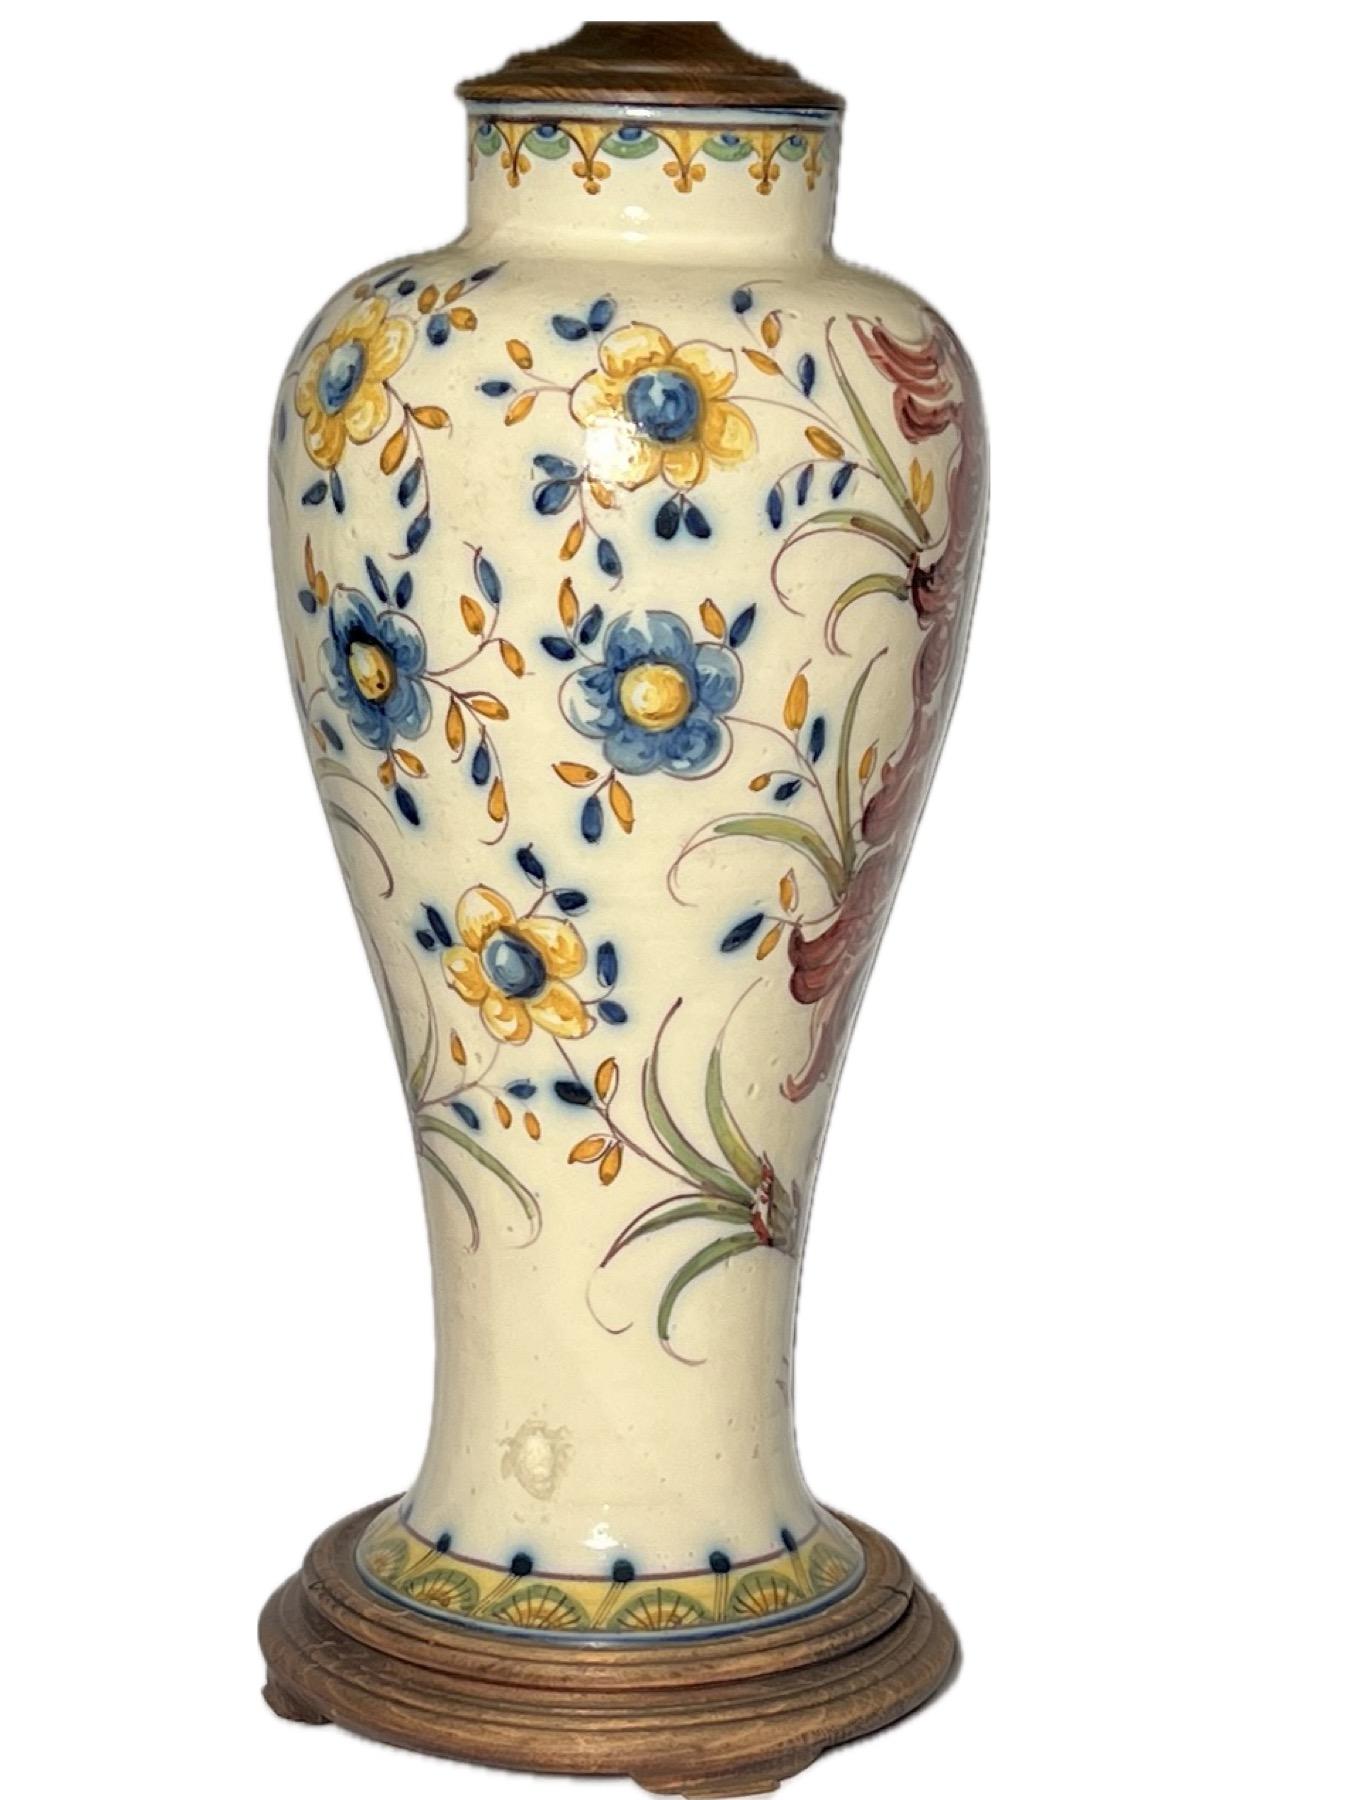 Antique Italian Faience Majolica Porcelain Vase Converted into a Lamp Ca. 1880   In Good Condition For Sale In New Orleans, LA